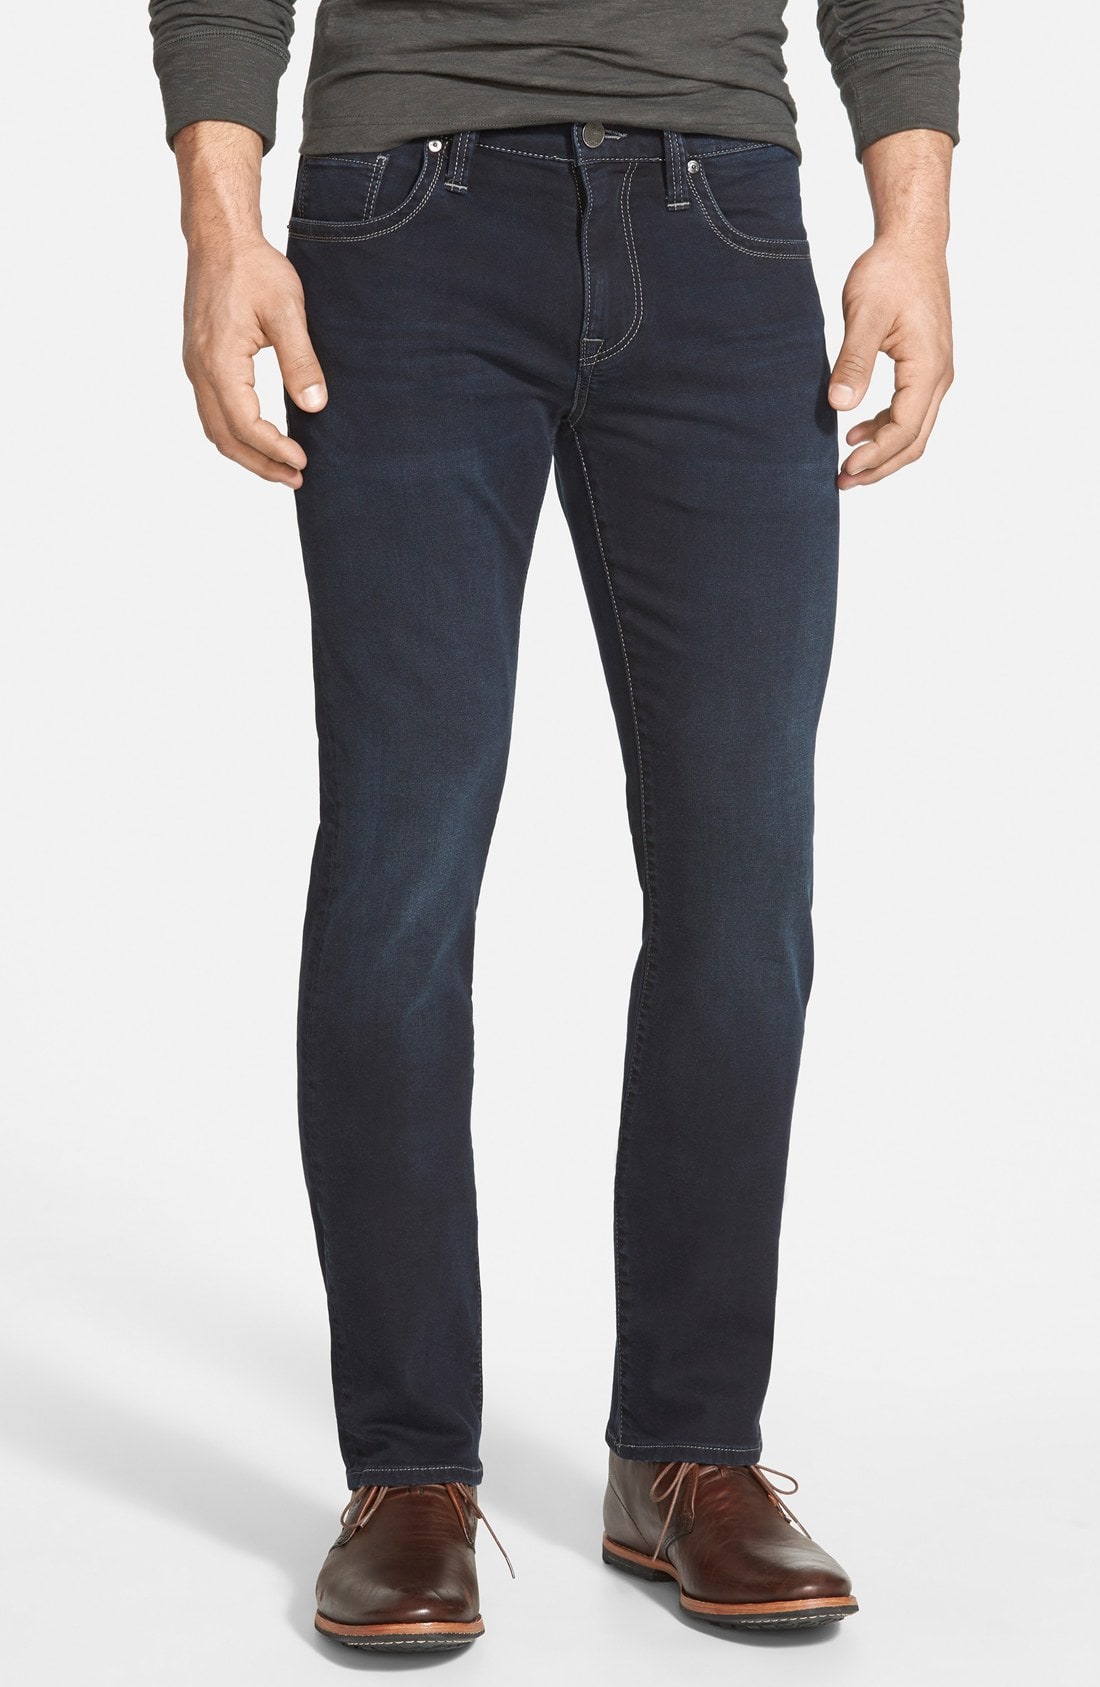 34 Heritage Courage Relaxed Fit Jeans (Midnight Austin) (Online Only) (Regular & Tall)